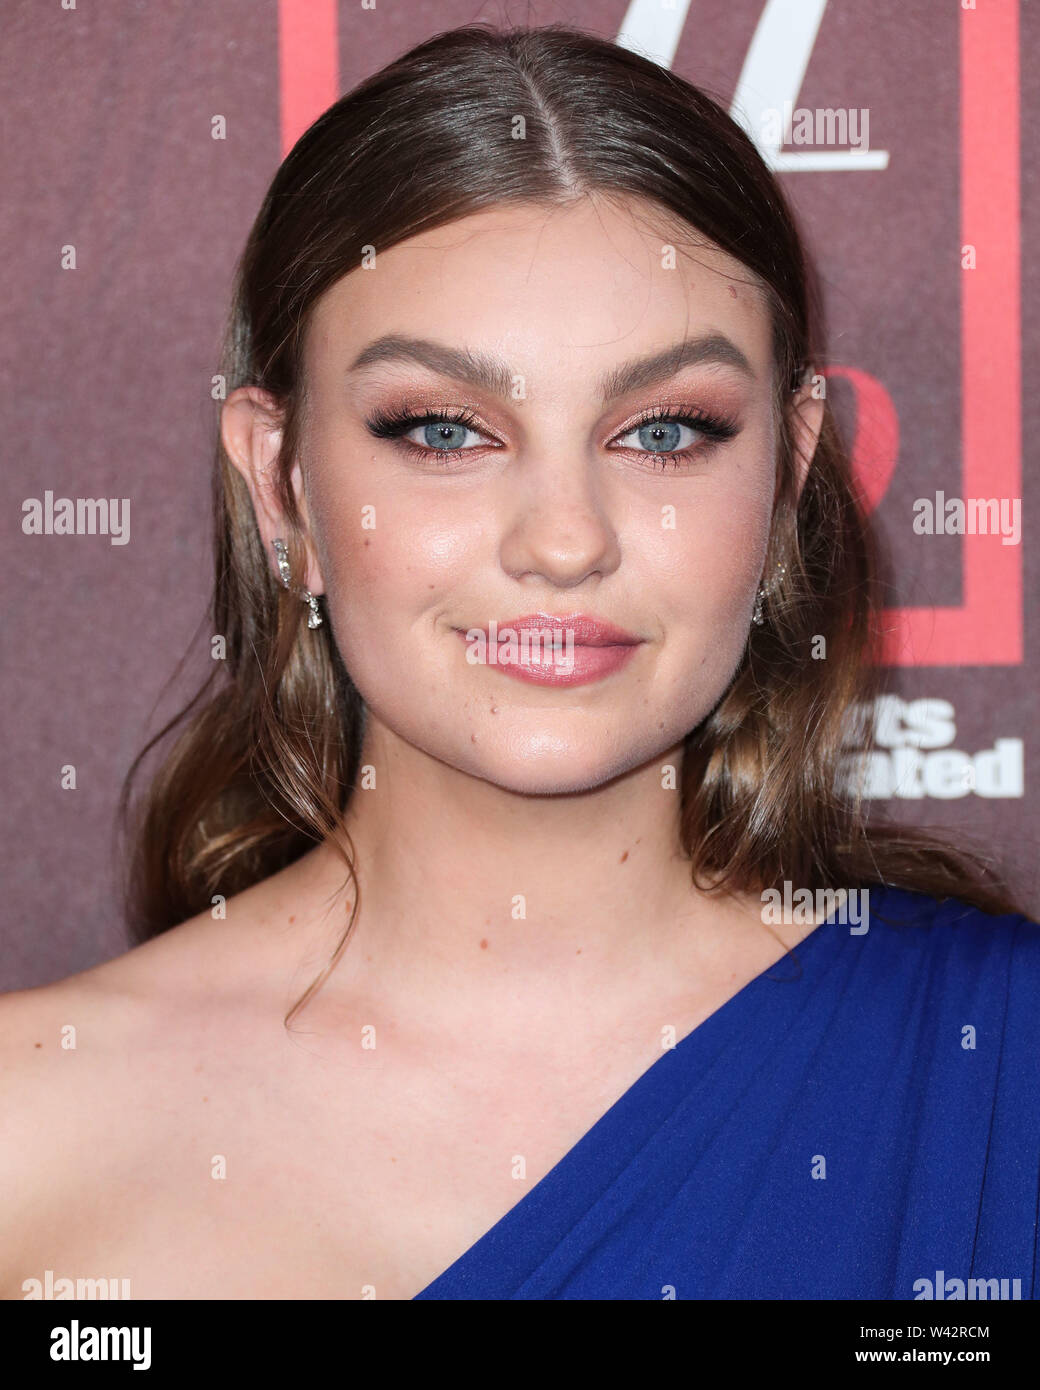 Hollywood, United States. 18th July, 2019. HOLLYWOOD, LOS ANGELES, CALIFORNIA, USA - JULY 18: Model Olivia Brower arrives at the Sports Illustrated Fashionable 50 held at Sunset Room Hollywood on July 18, 2019 in Hollywood, Los Angeles, California, United States. (Photo by Xavier Collin/Image Press Agency) Credit: Image Press Agency/Alamy Live News Stock Photo